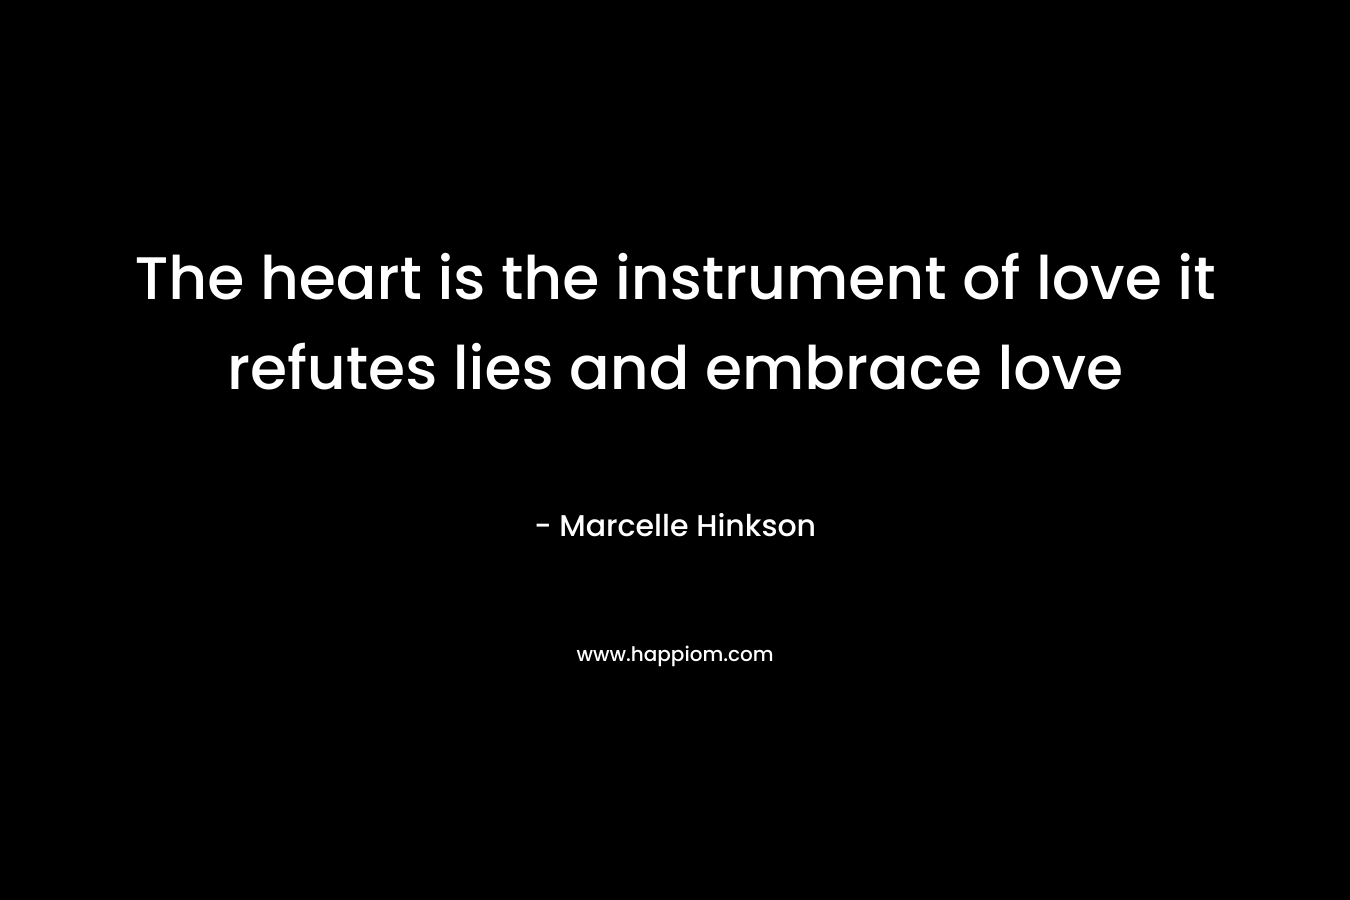 The heart is the instrument of love it refutes lies and embrace love – Marcelle Hinkson